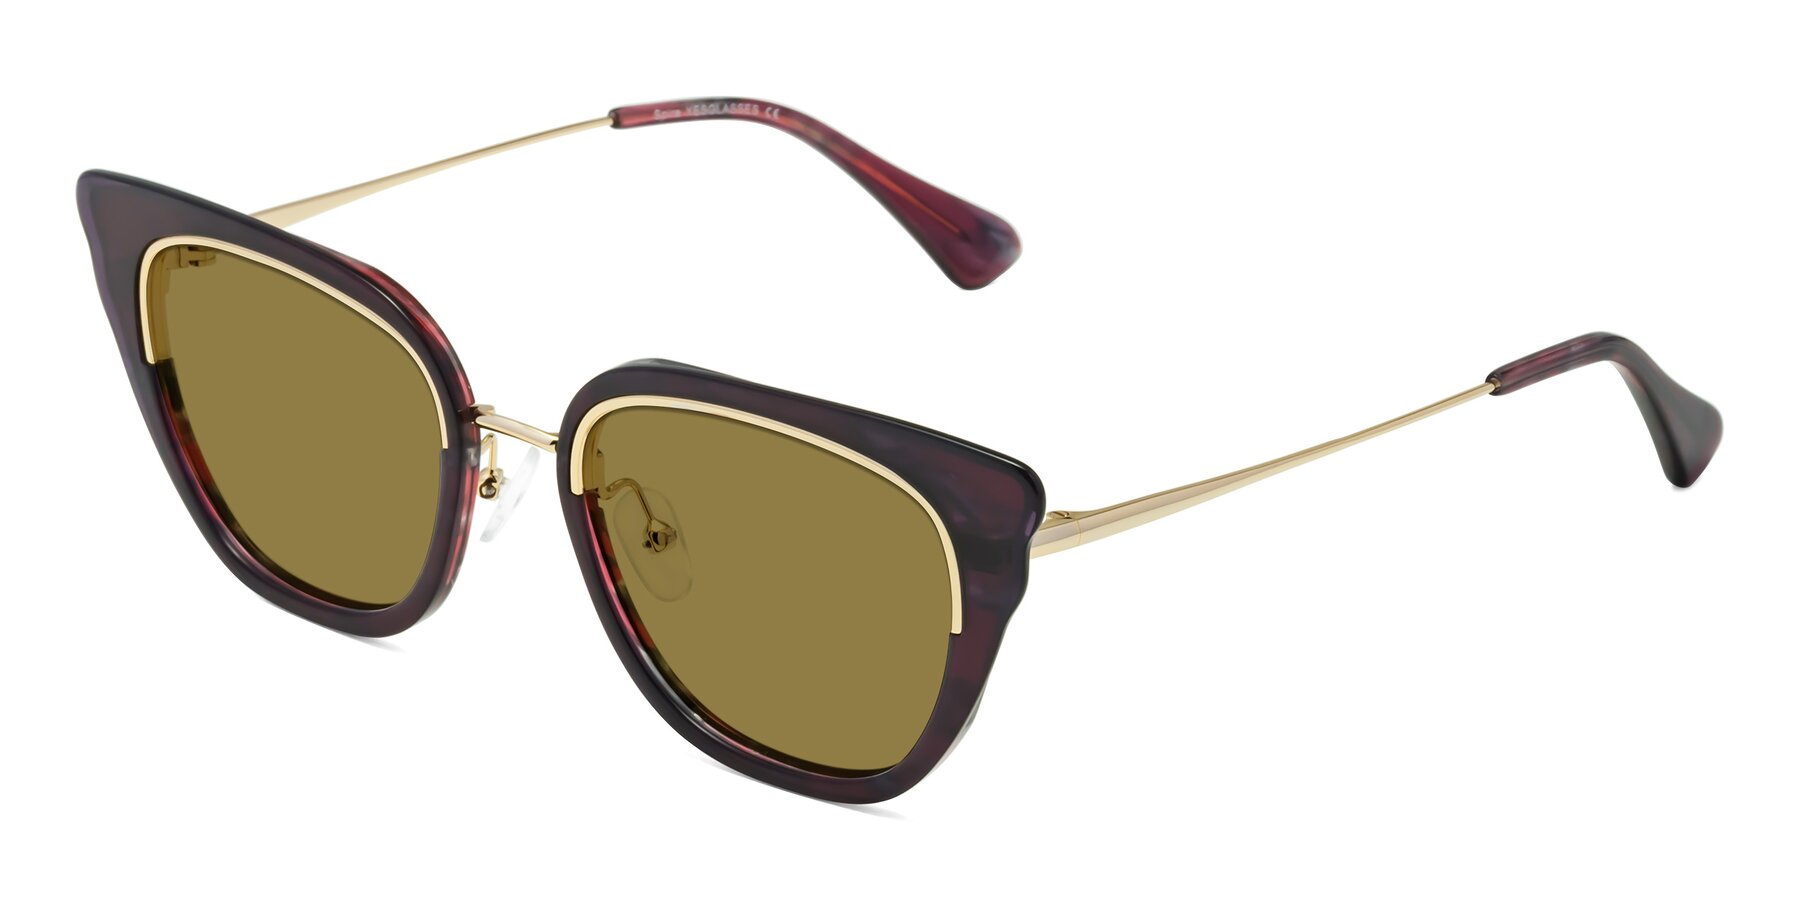 Angle of Spire in Dark Voilet-Gold with Brown Polarized Lenses